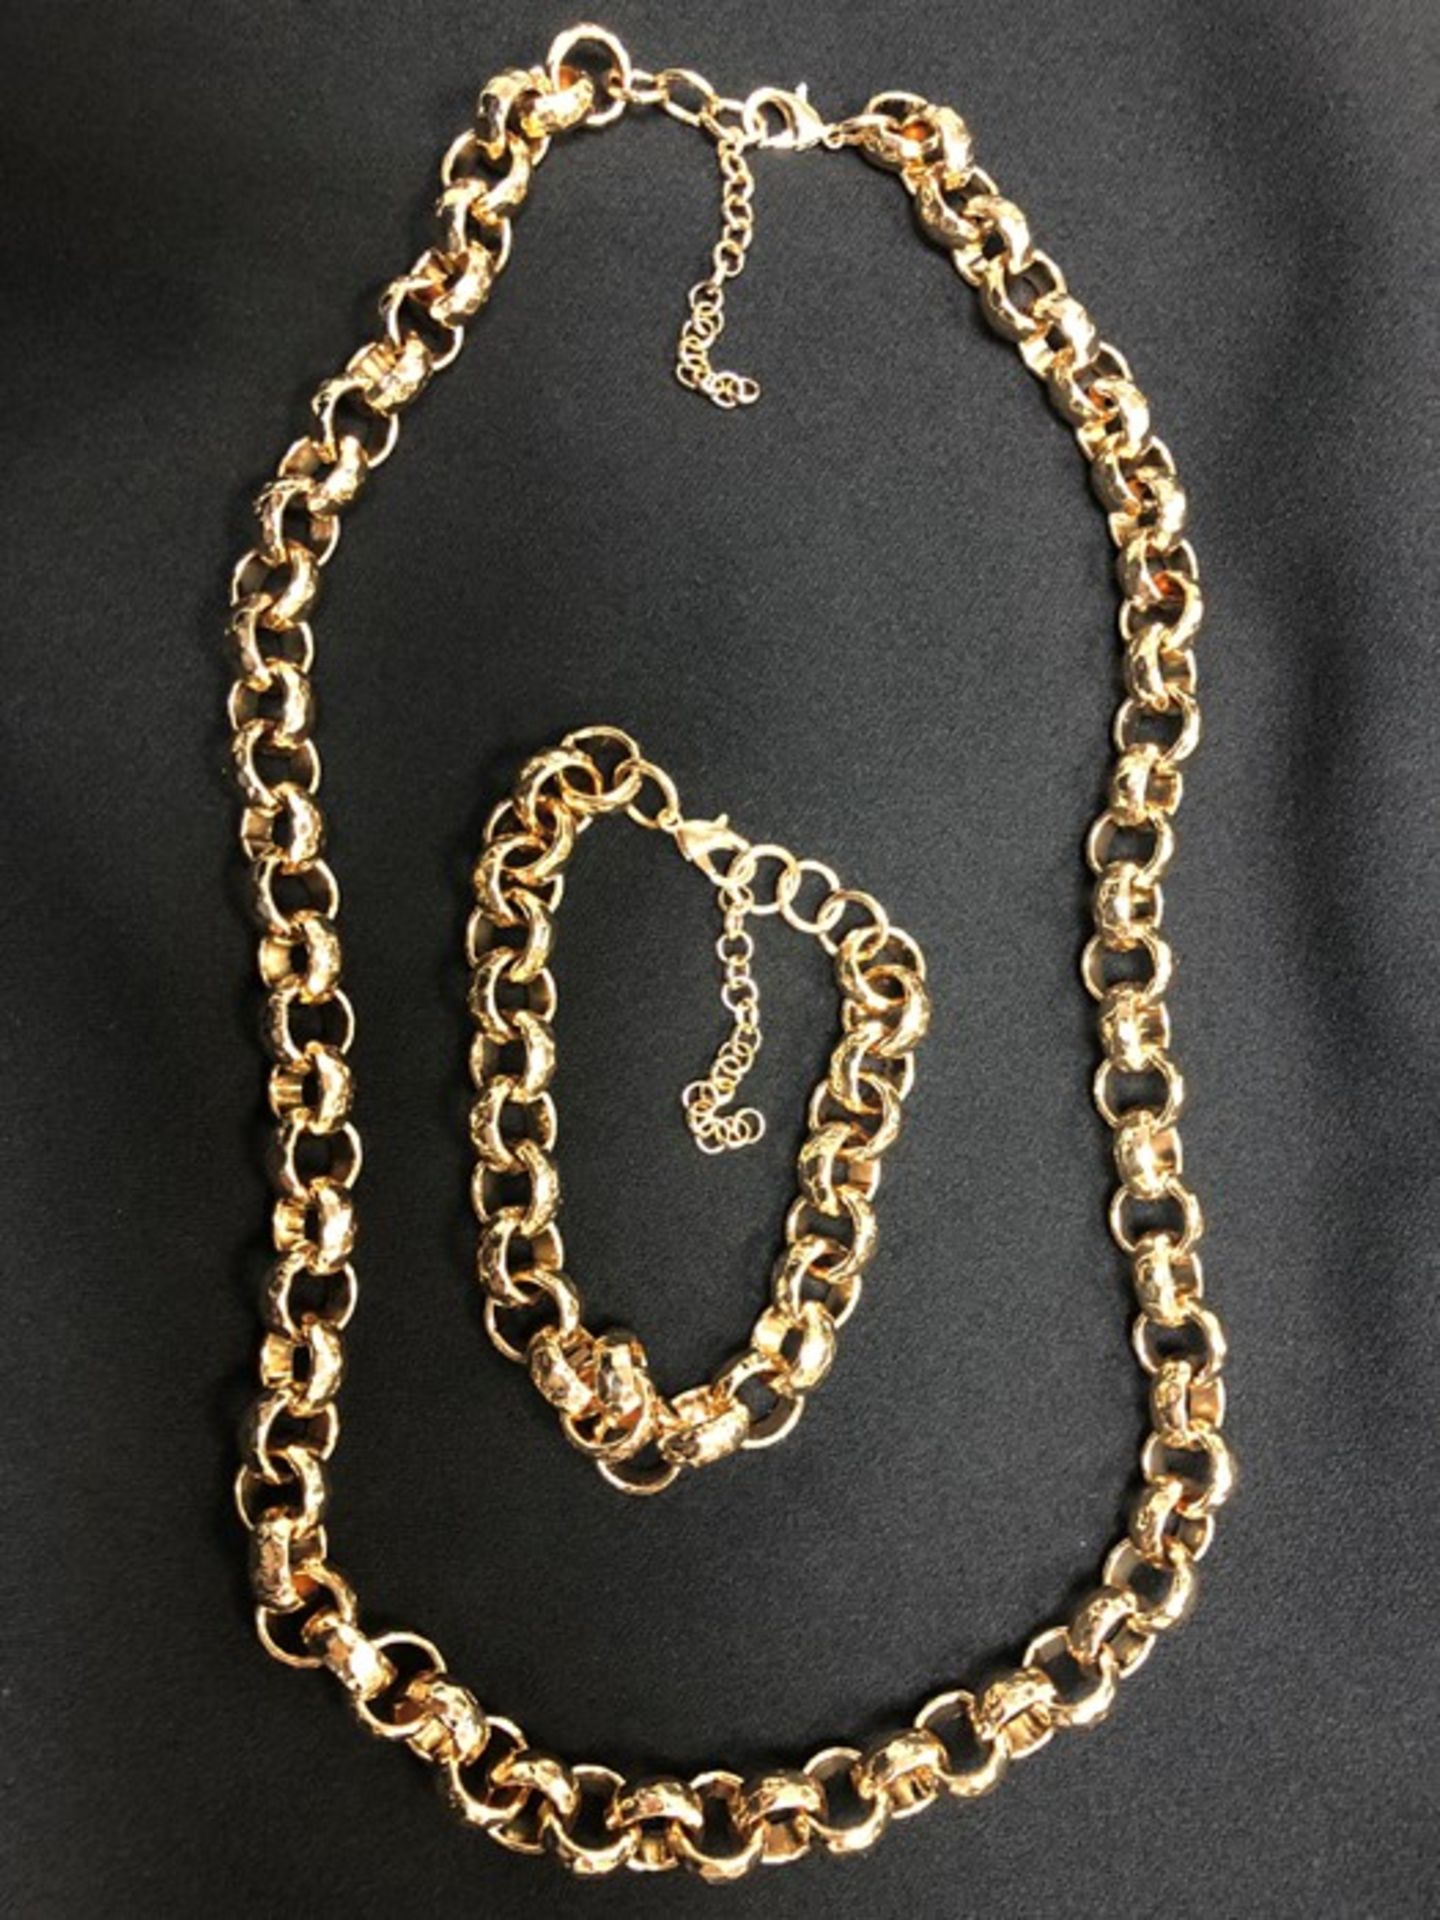 Gold Filled Diamond cut Belcher Chain Necklace and Bracelet set, new, Necklace is 24" and weighs 160